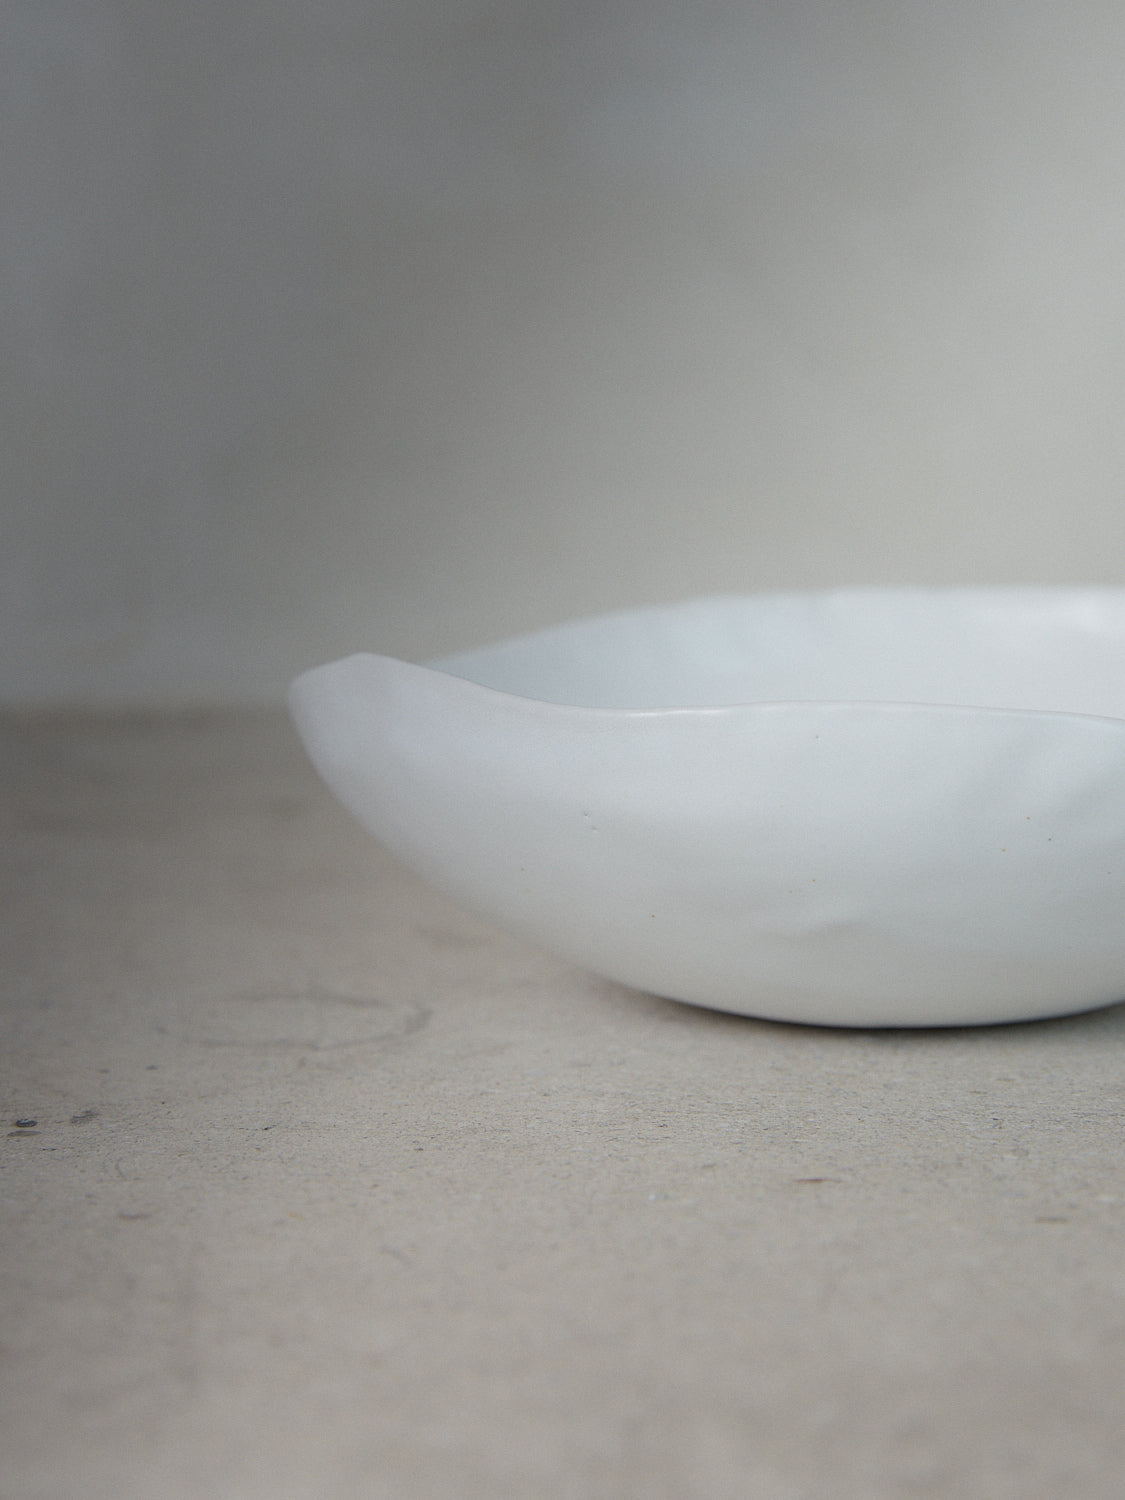 Raw Shallow Bowl in Ecru. Handmade shallow serving bowl perfect for entertaining and everyday use in classic matte white stoneware.